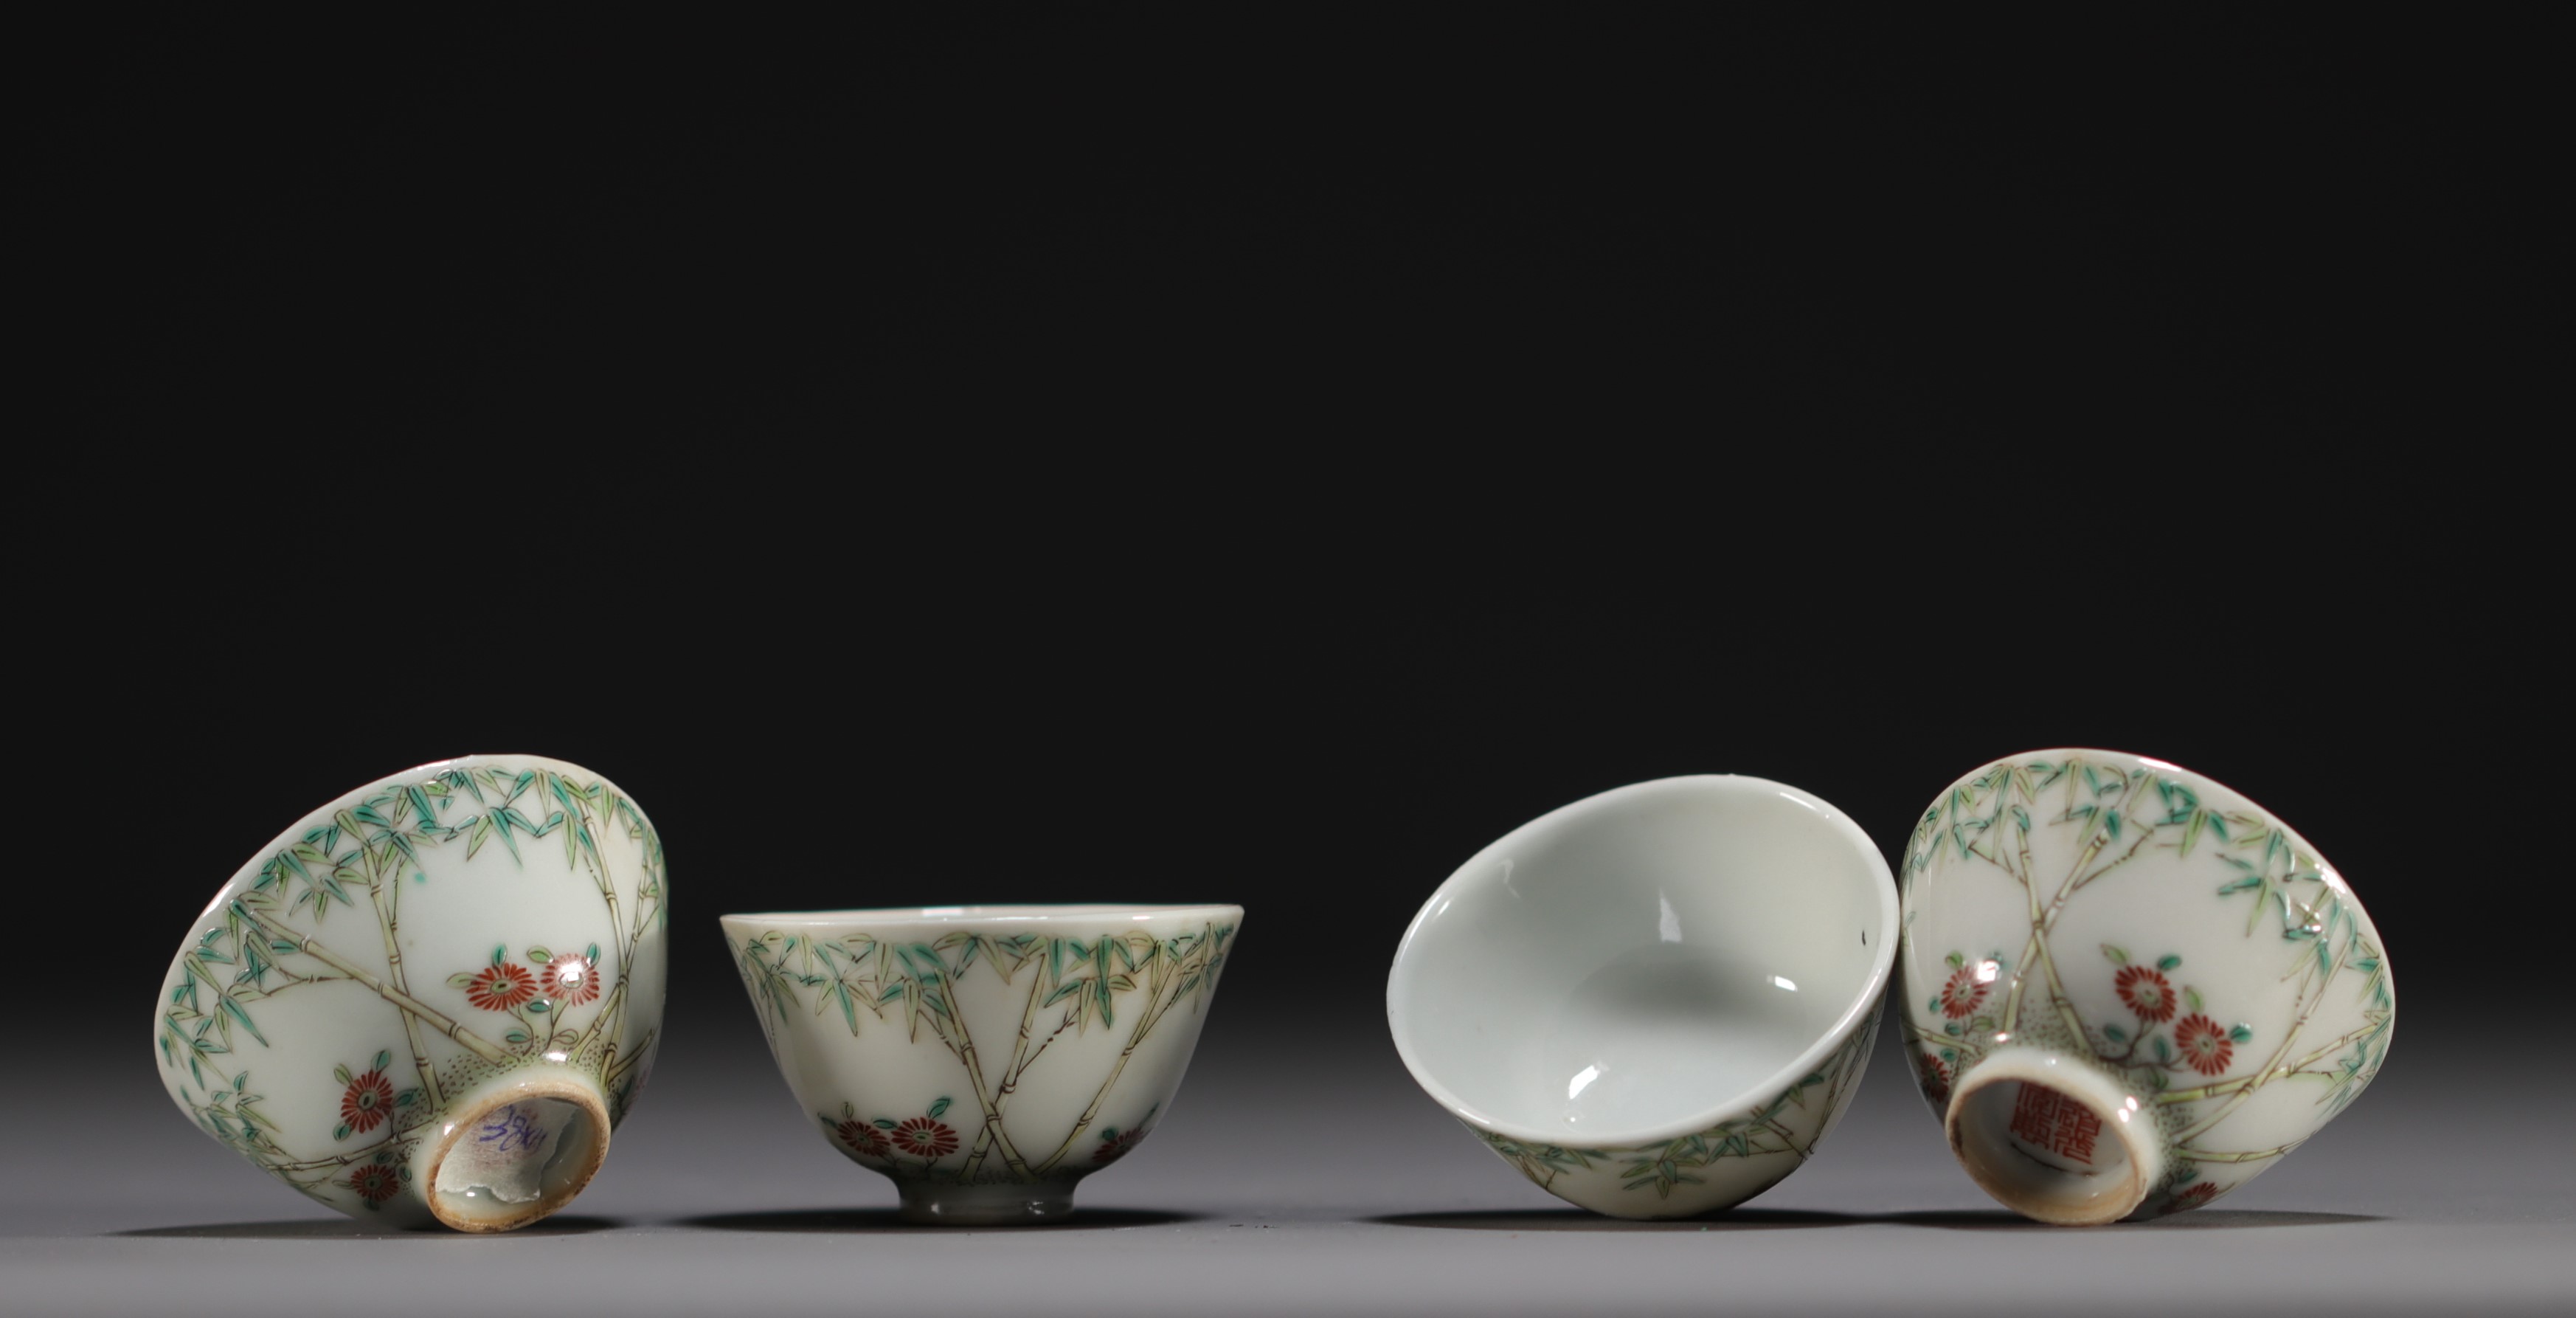 China - Set of eleven bowls of different sizes in famille rose porcelain, 19th century. - Image 8 of 8